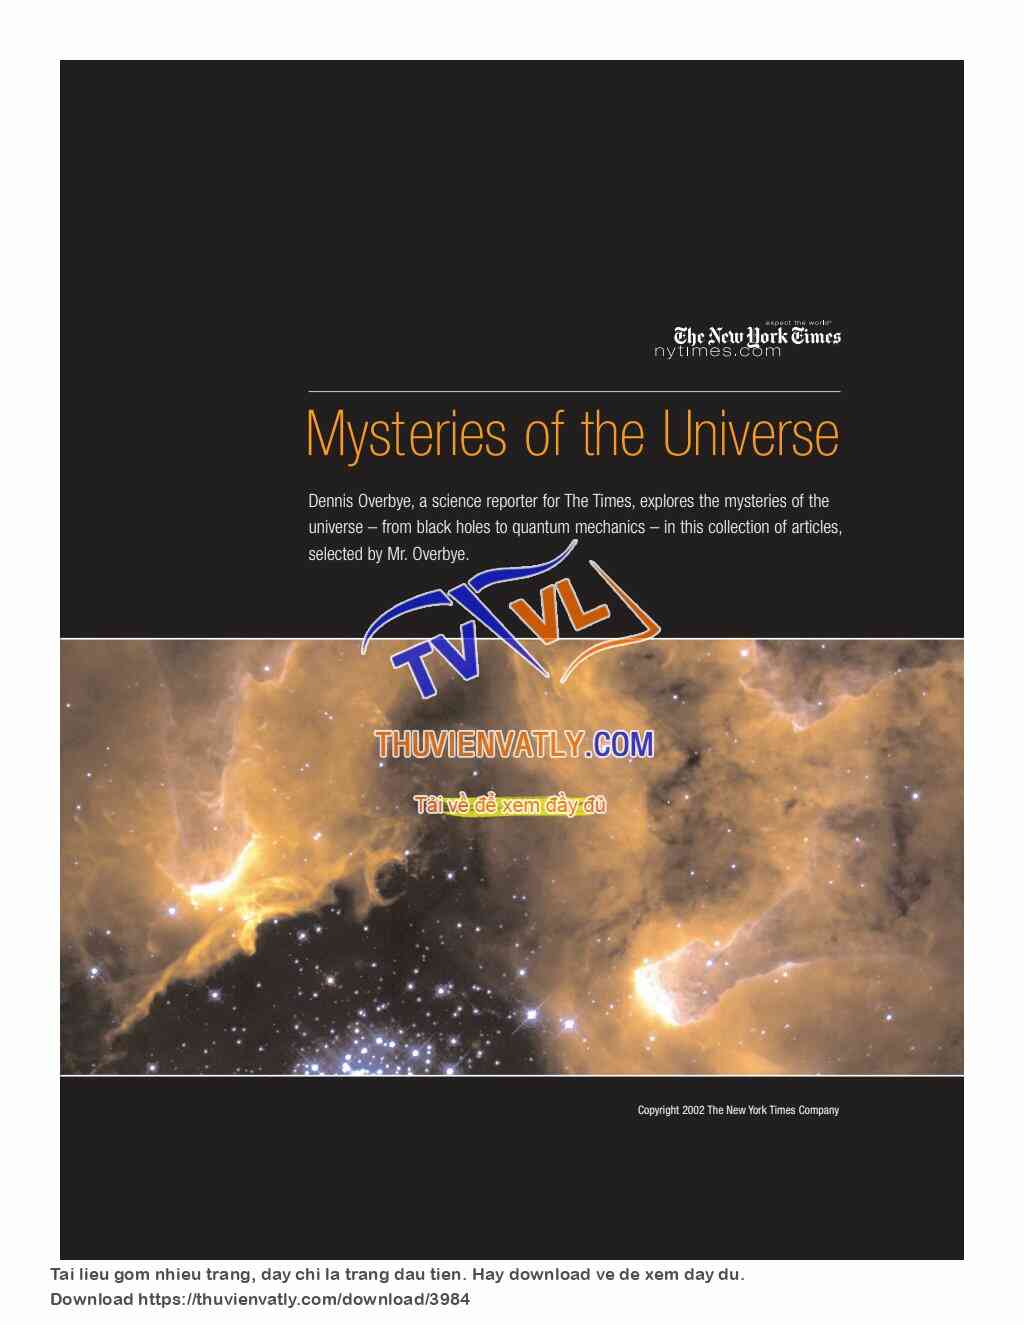 Mysteries of the Universe (Dennis Overbye)